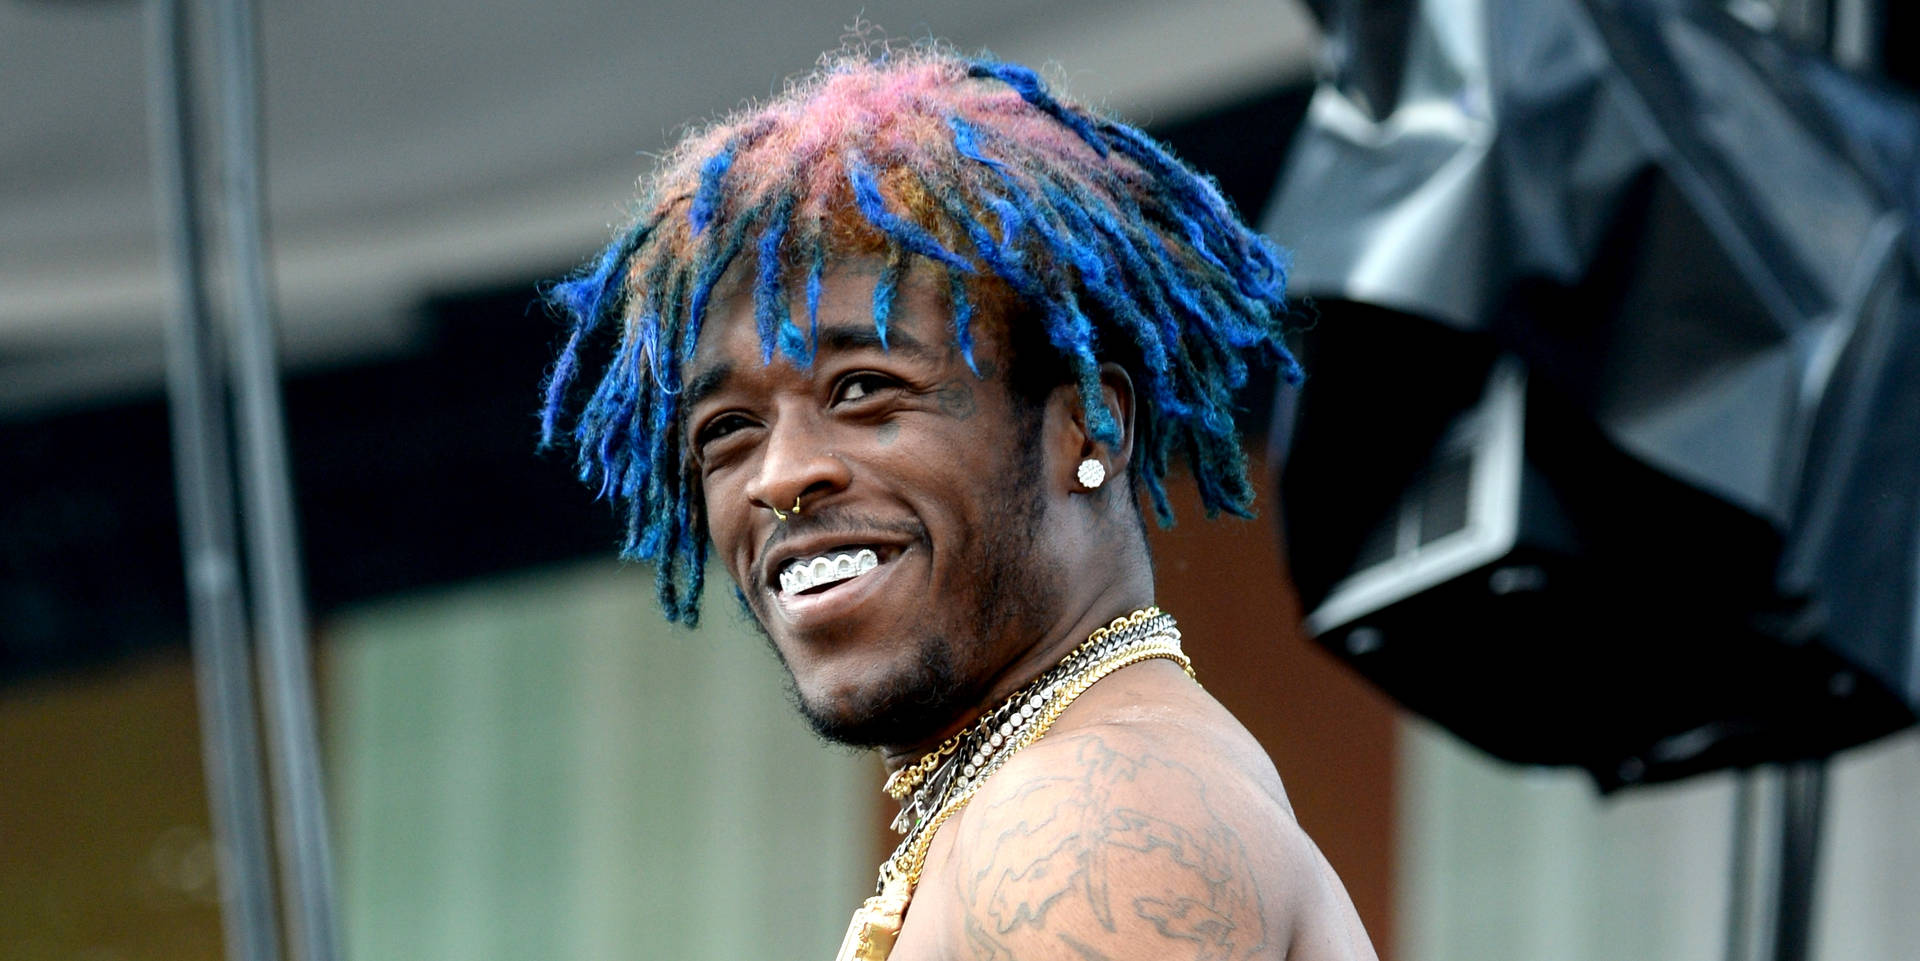 Lil Uzi Vert serving serious pearly whites. Wallpaper